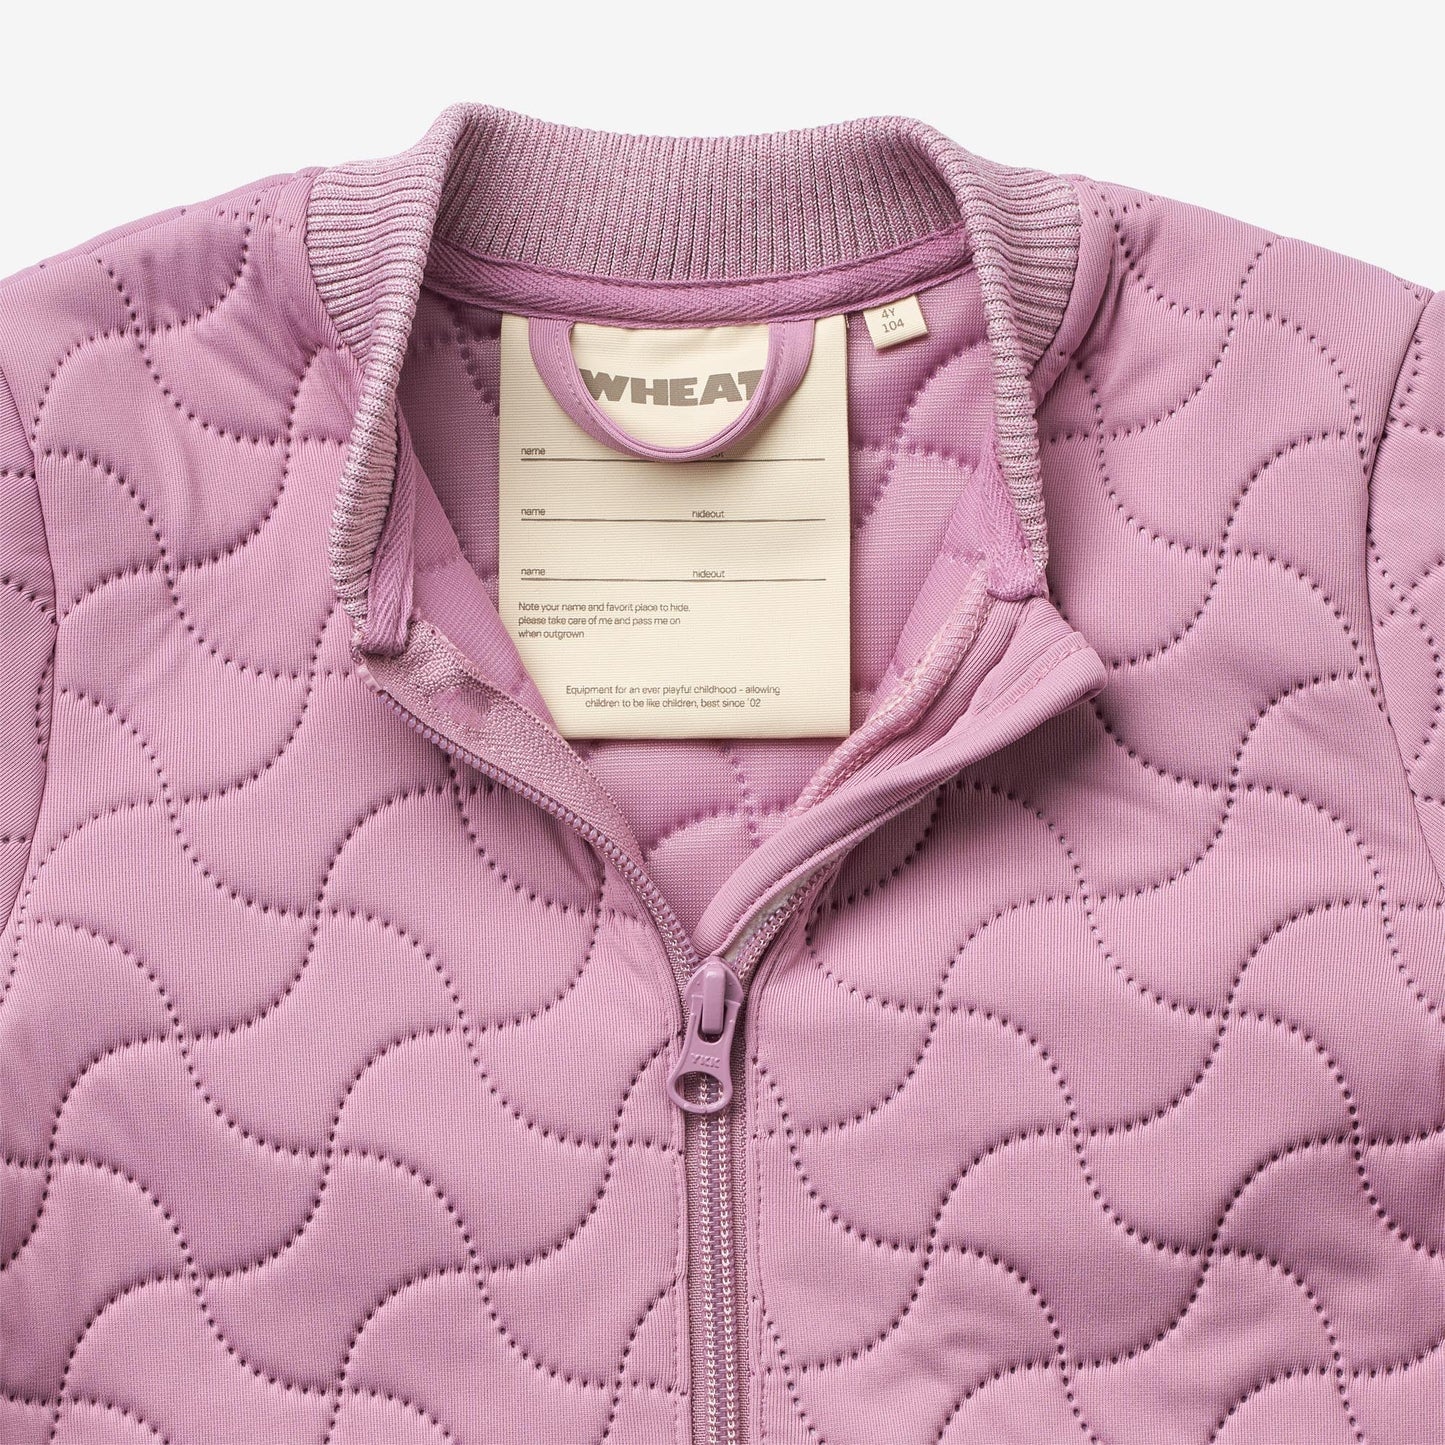 Wheat 'Herta' Children's Thermo Jacket - Spring Lilac